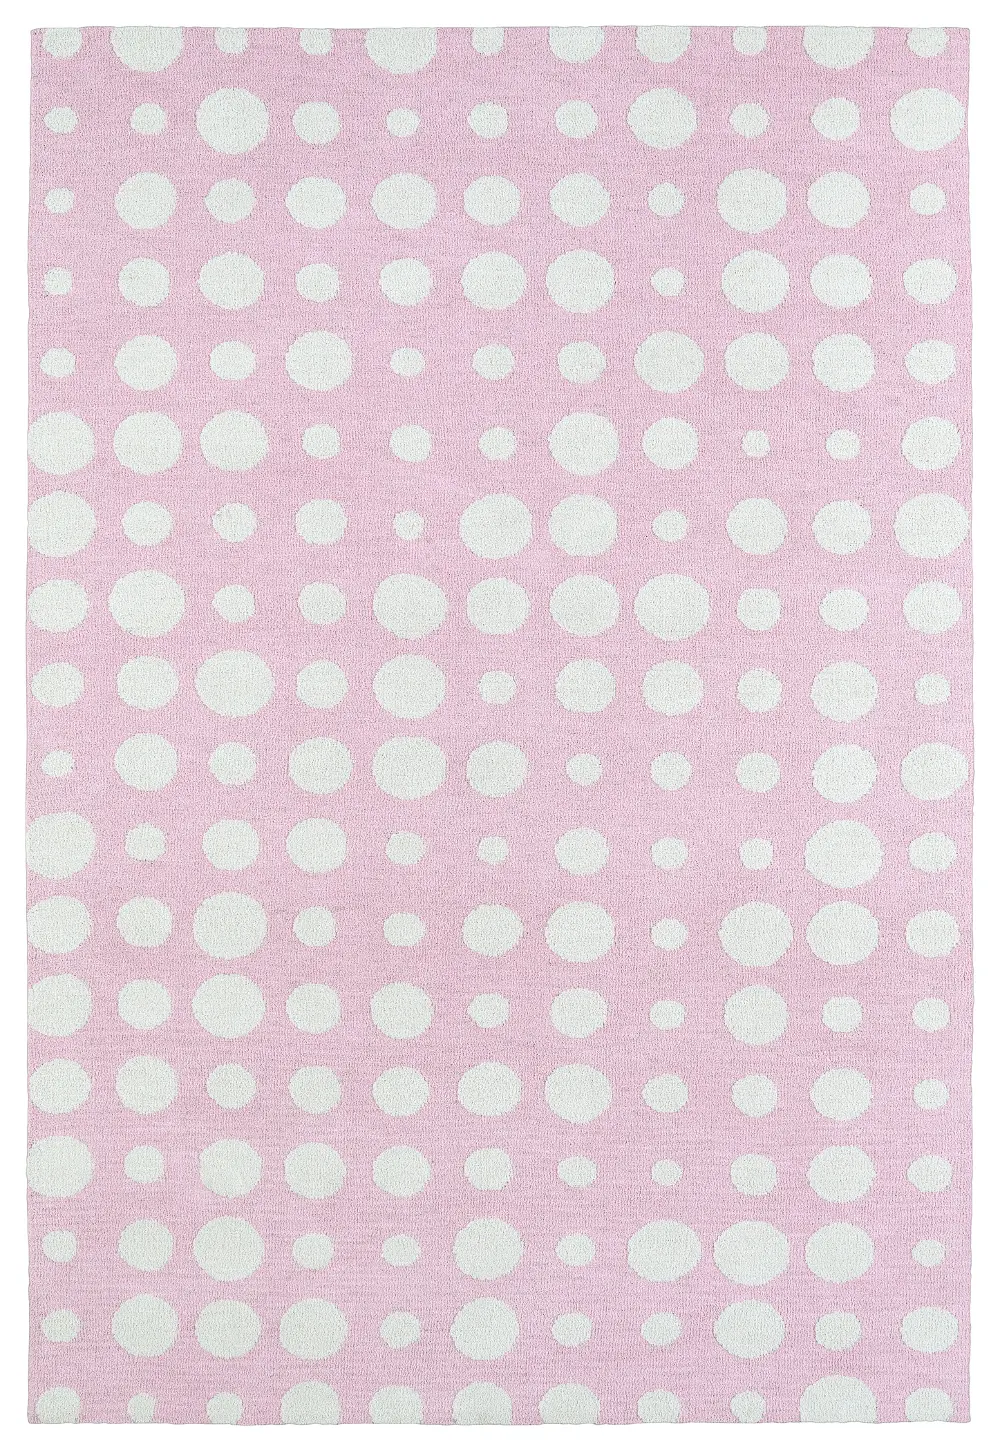 5 x 7 Medium Dotted Pink and Ivory Area Rug - Lily & Liam-1